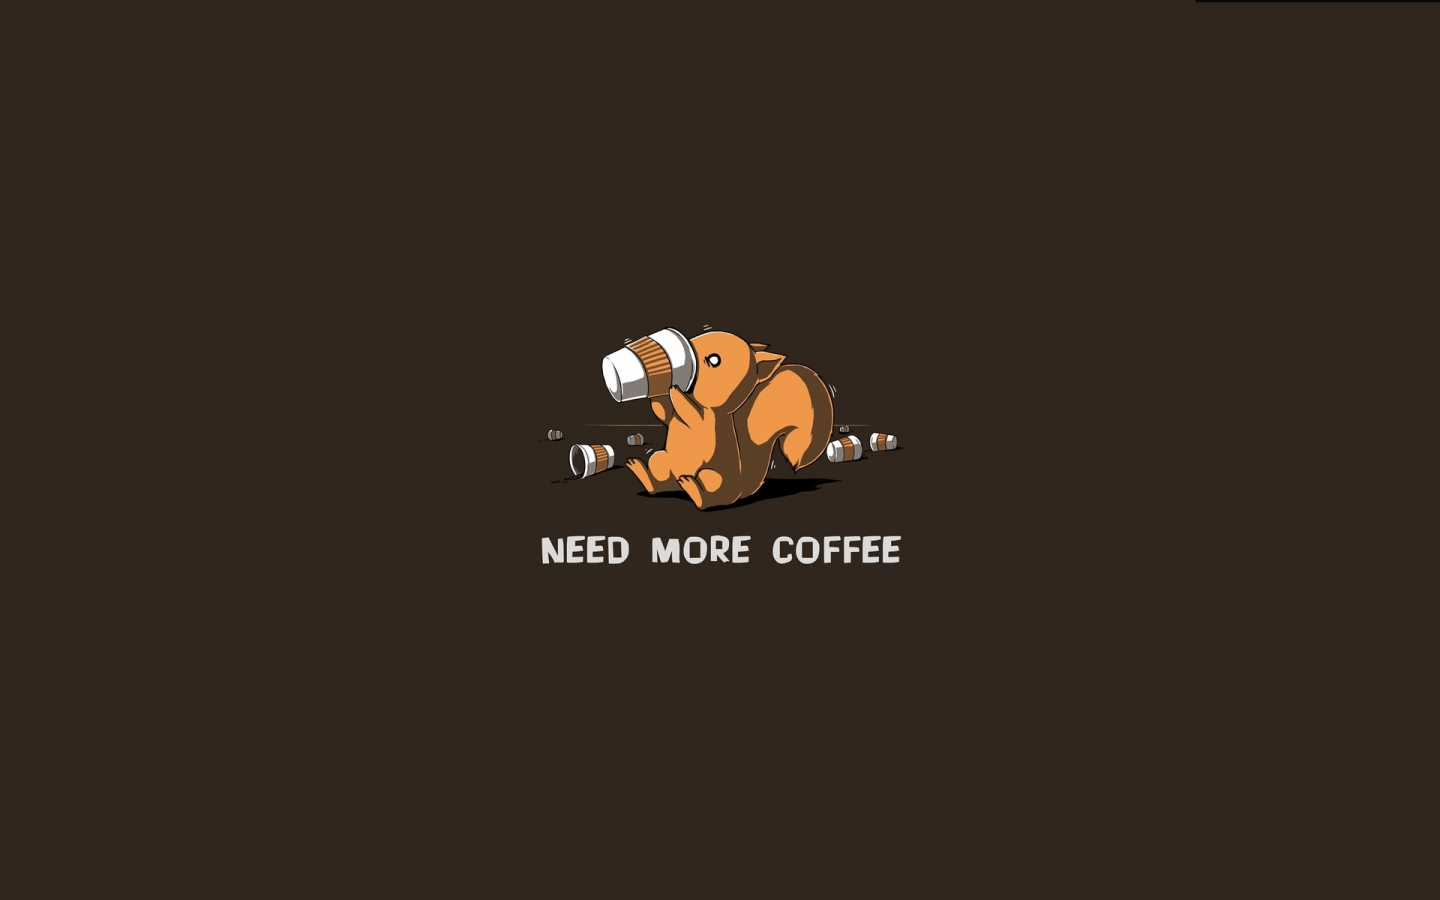 Need More Coffee for 1440 x 900 widescreen resolution